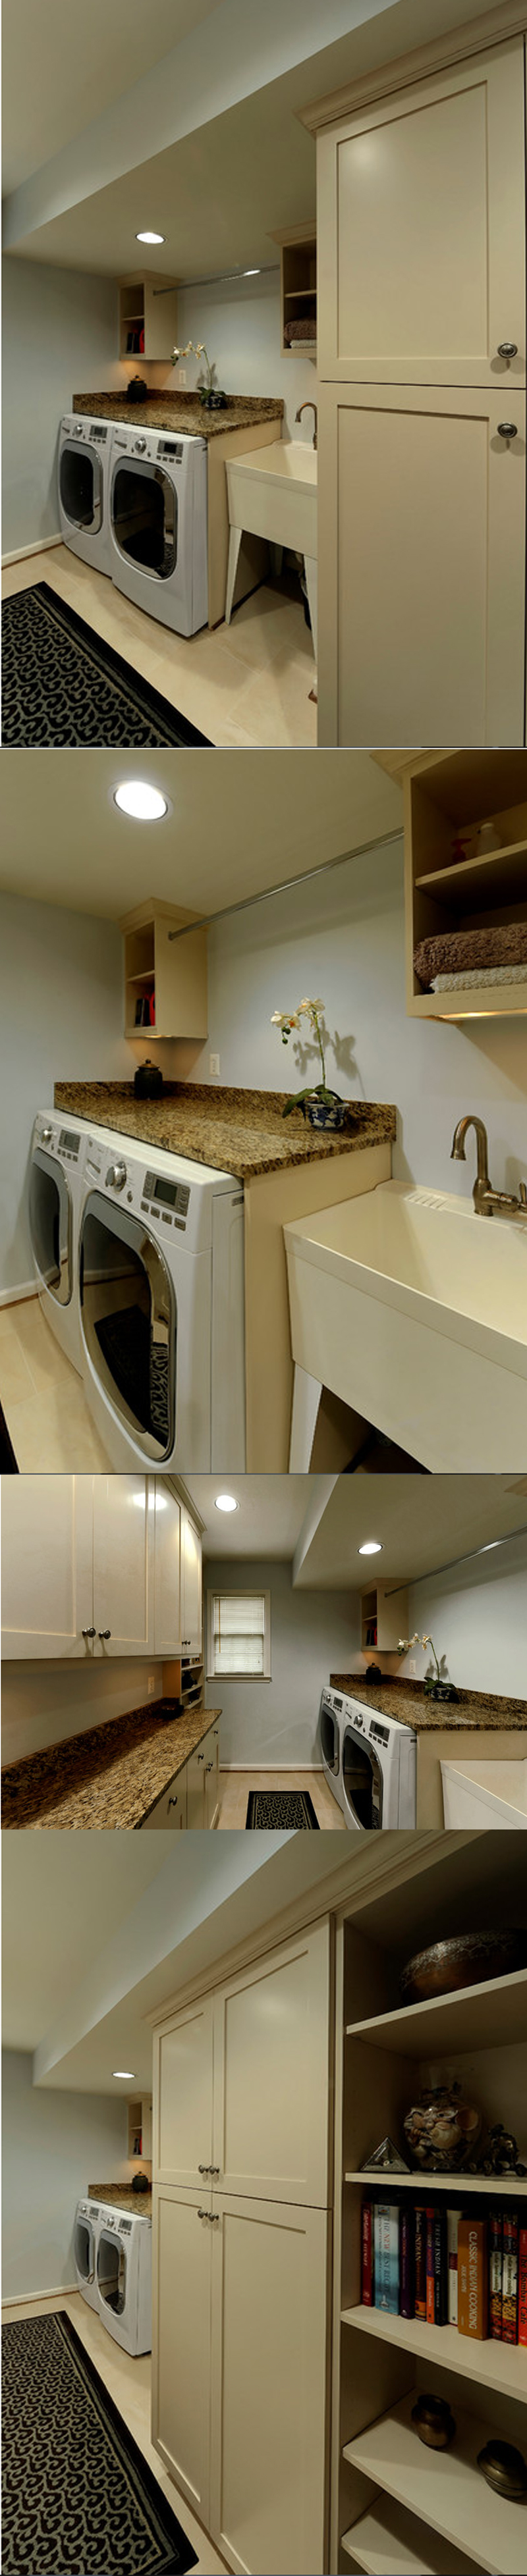 small laundry room ideas stackable washer dryer